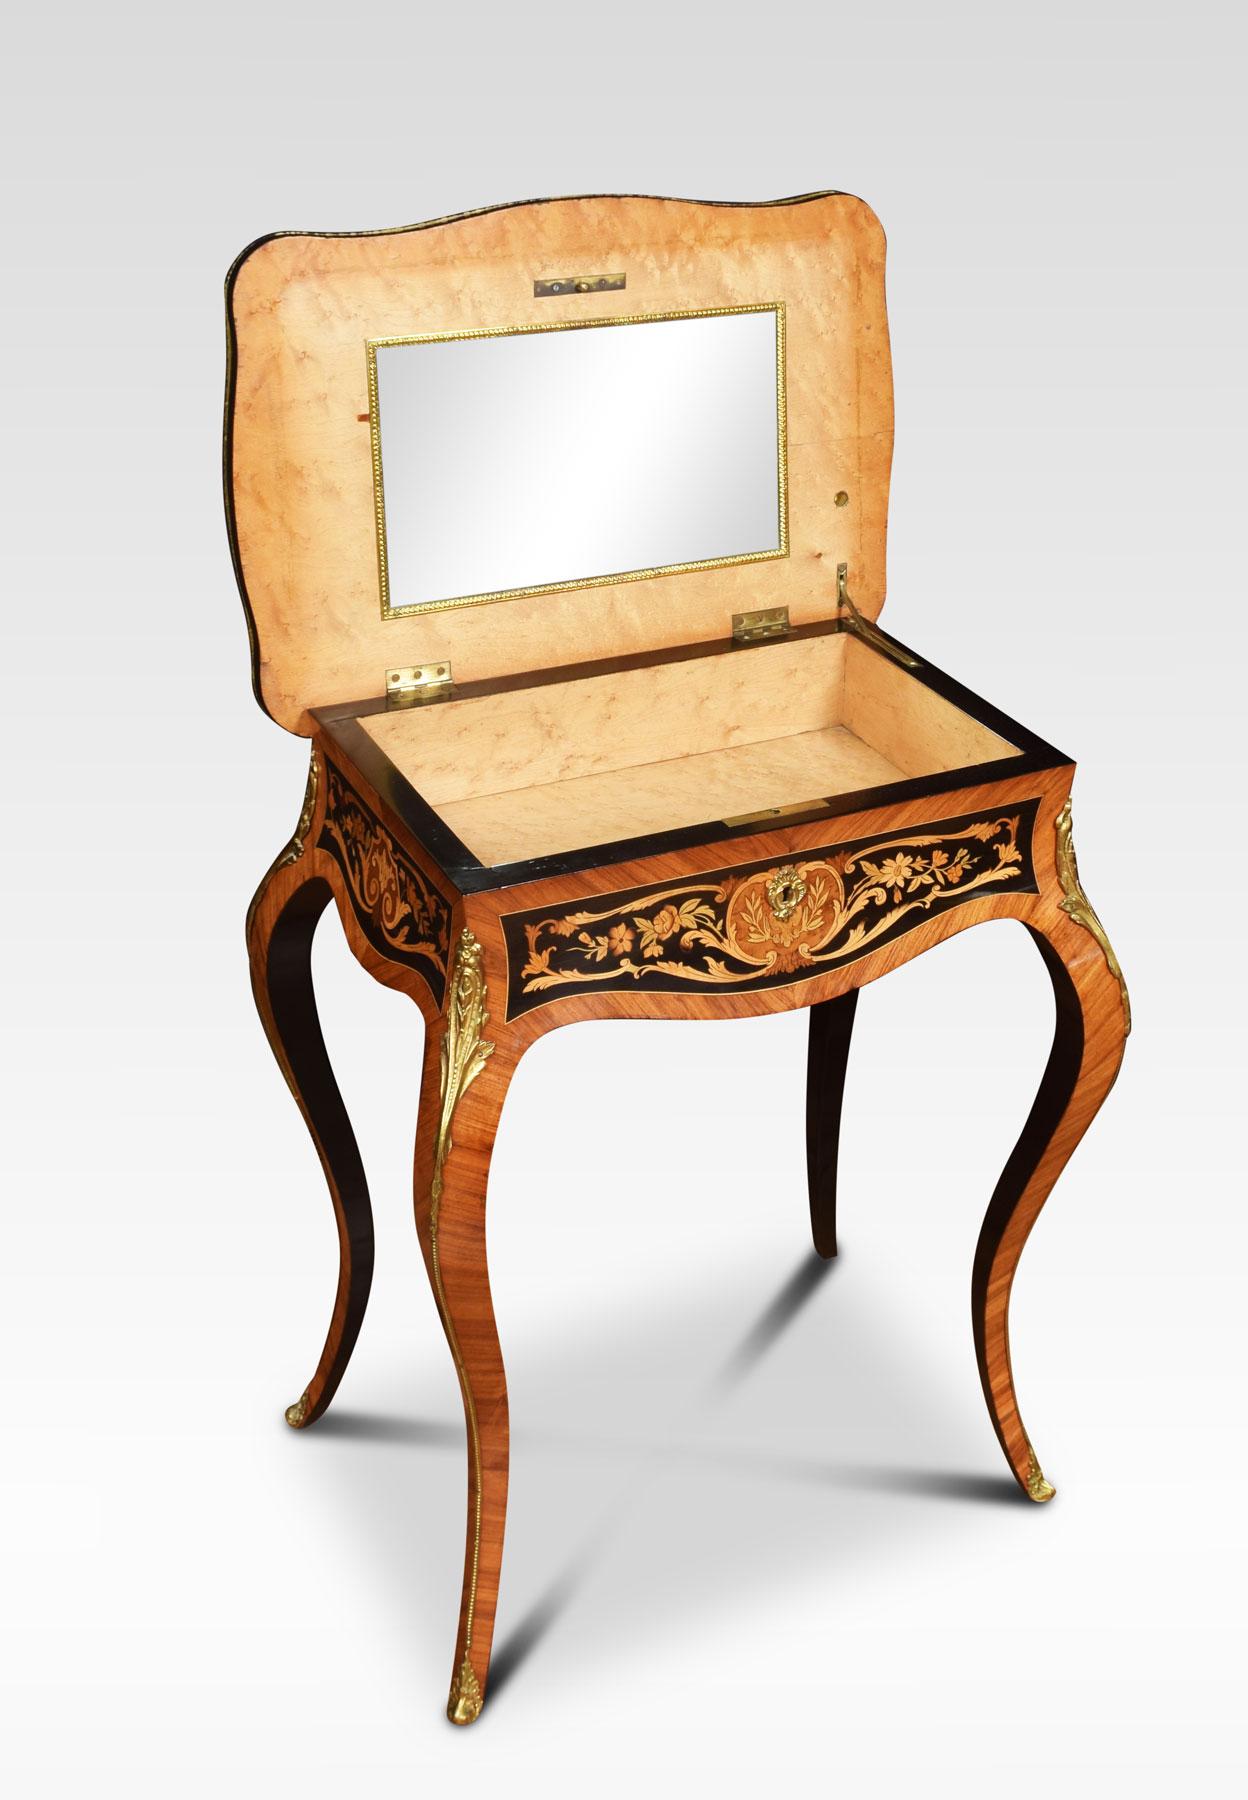 British Pair of Kingwood and Marquetry Inlaid Side Tables